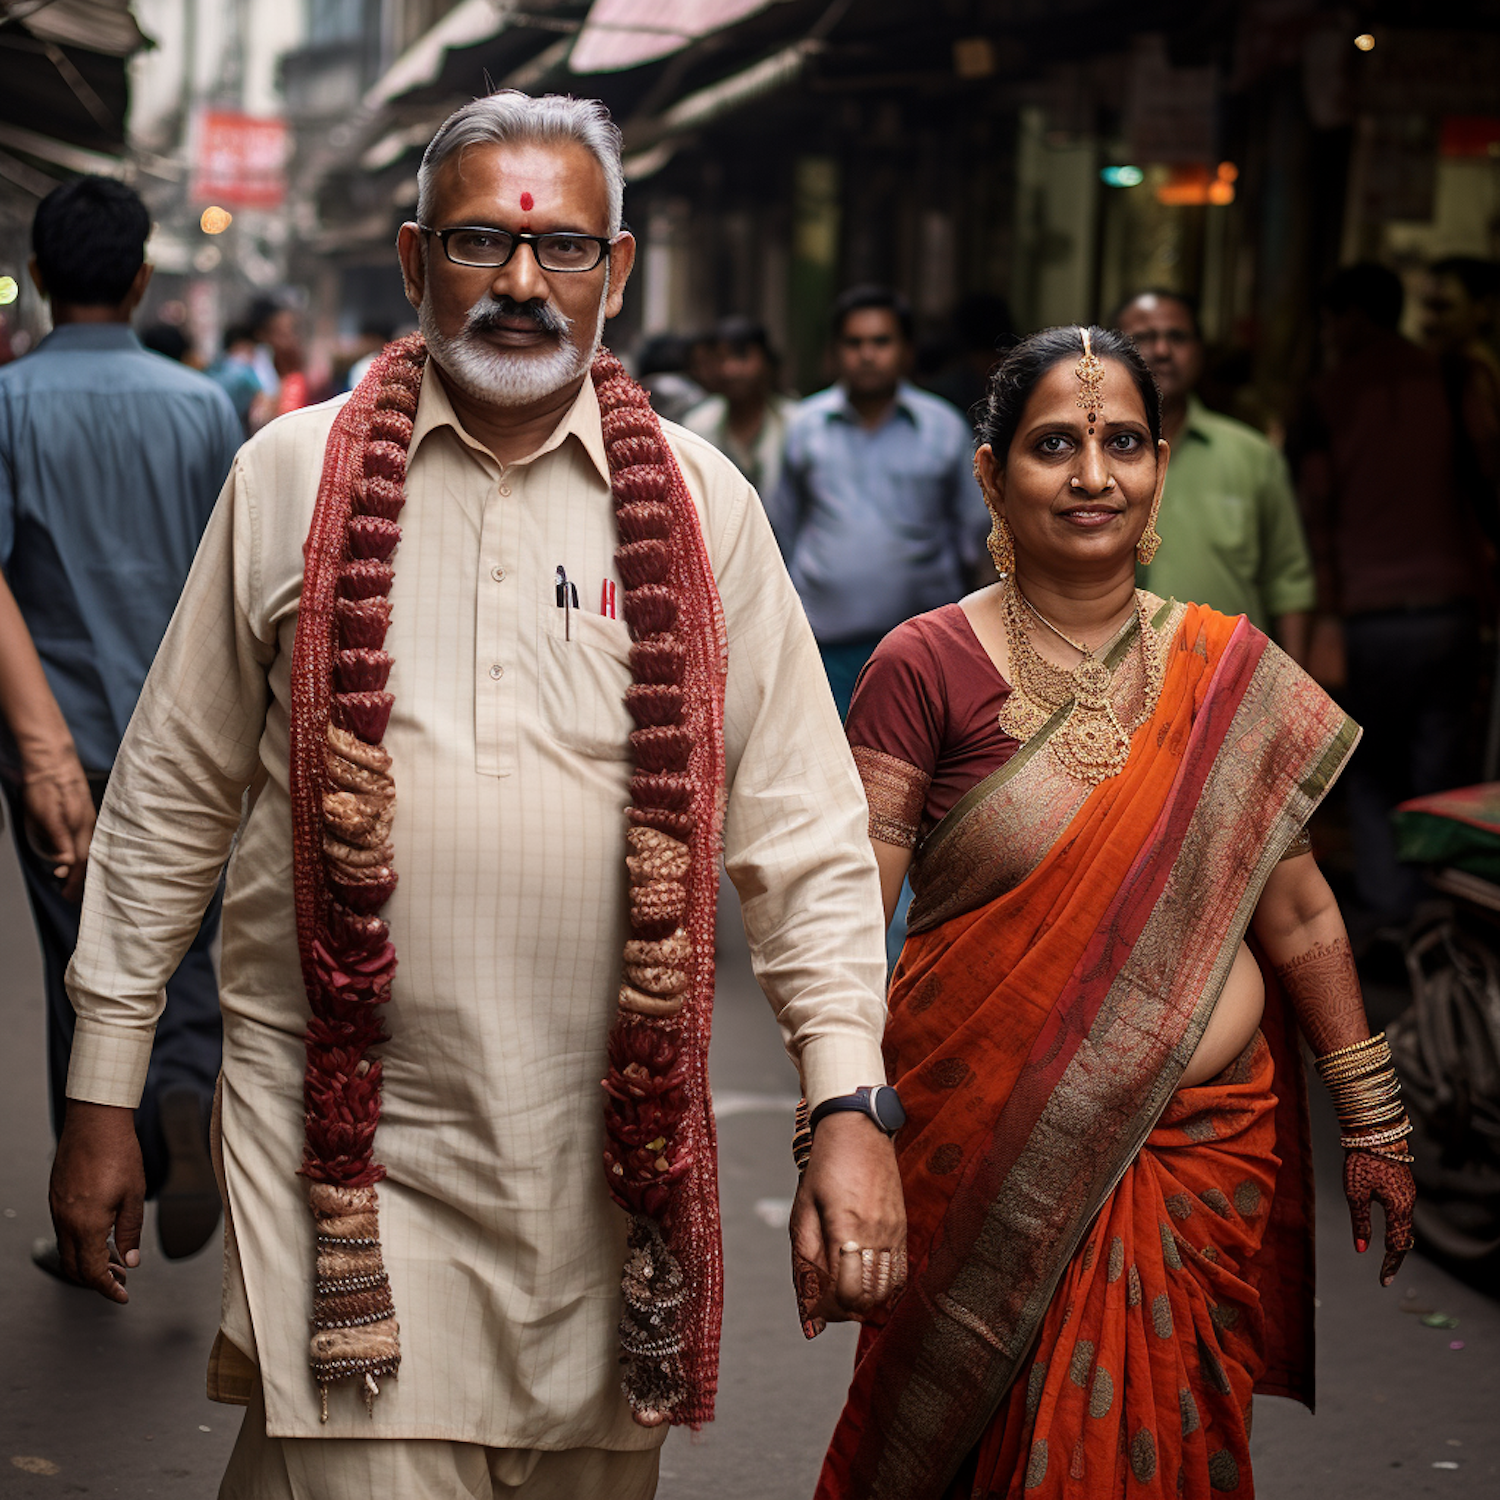 Elderly Indian Couple in Traditional Attire